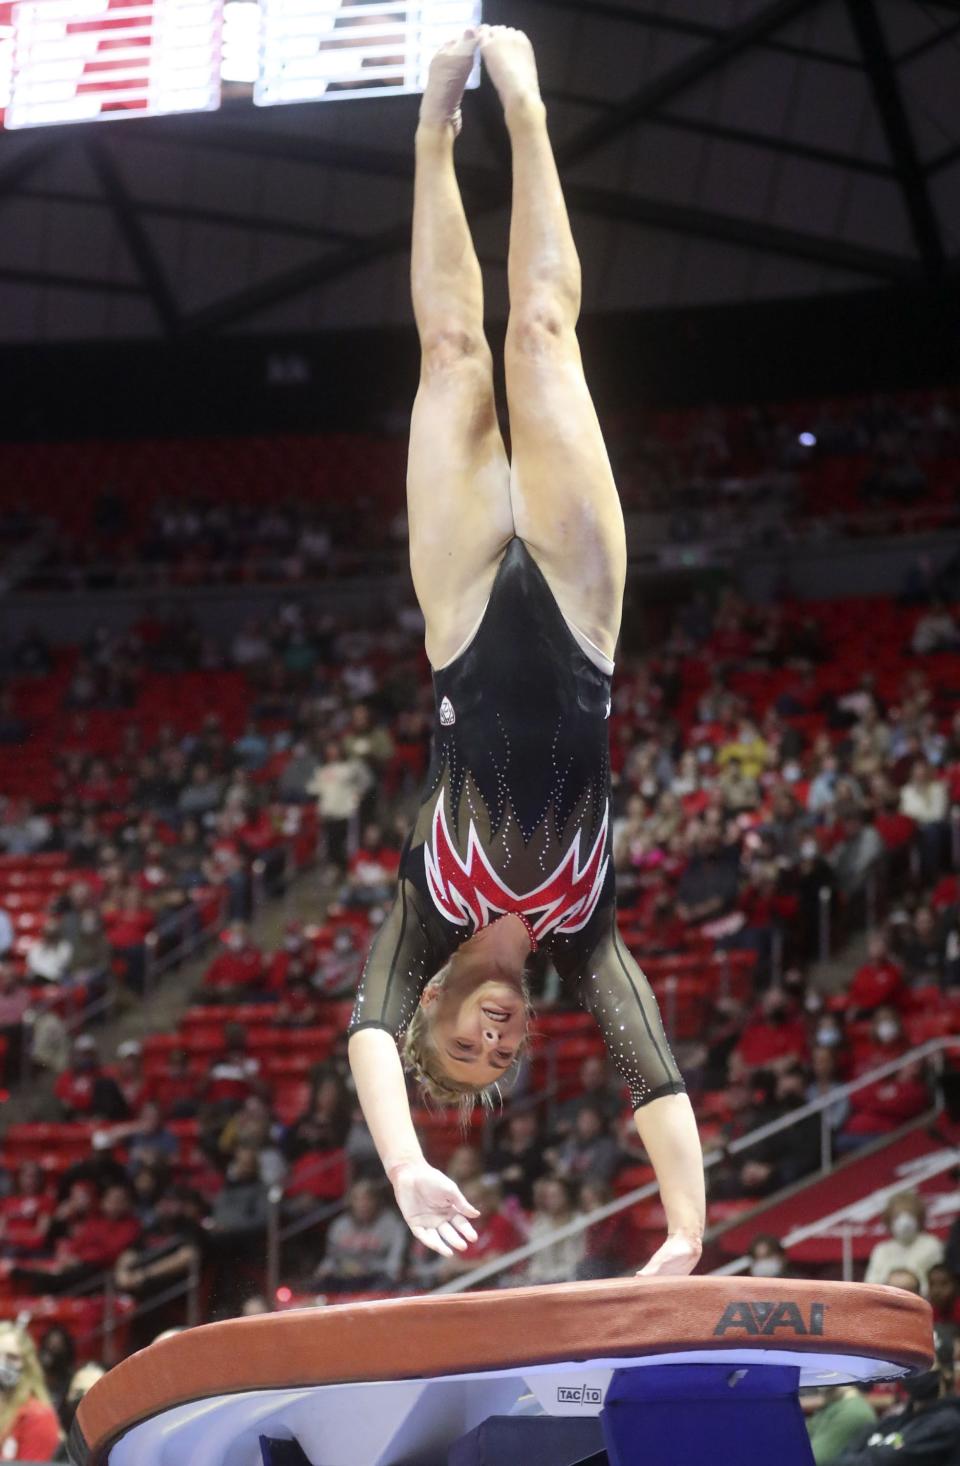 Utah’s Lucy Stanhope competes on the vault as the Utah Red Rocks compete against Oregon State in a gymnastics meet at the Huntsman Center in Salt Lake City on Friday, Feb. 18, 2022. Utah won. | Kristin Murphy, Deseret News